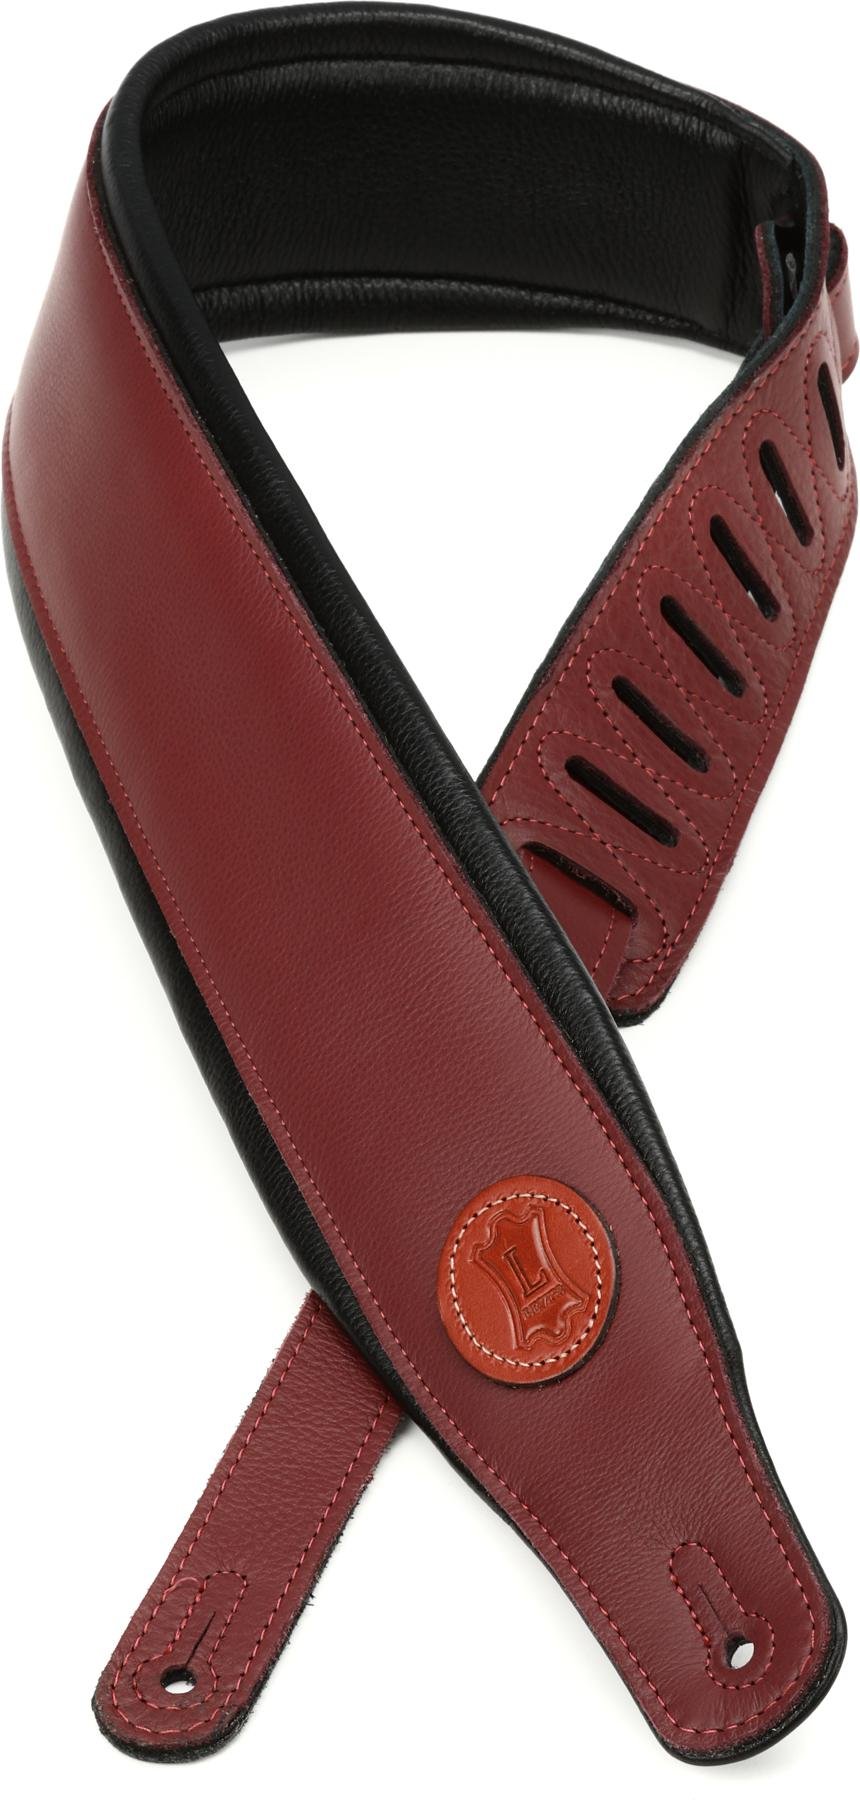 Red Levys Leathers 2 Polyester Guitar Strap Hex Design; Burgundy and Mustard MP2-007